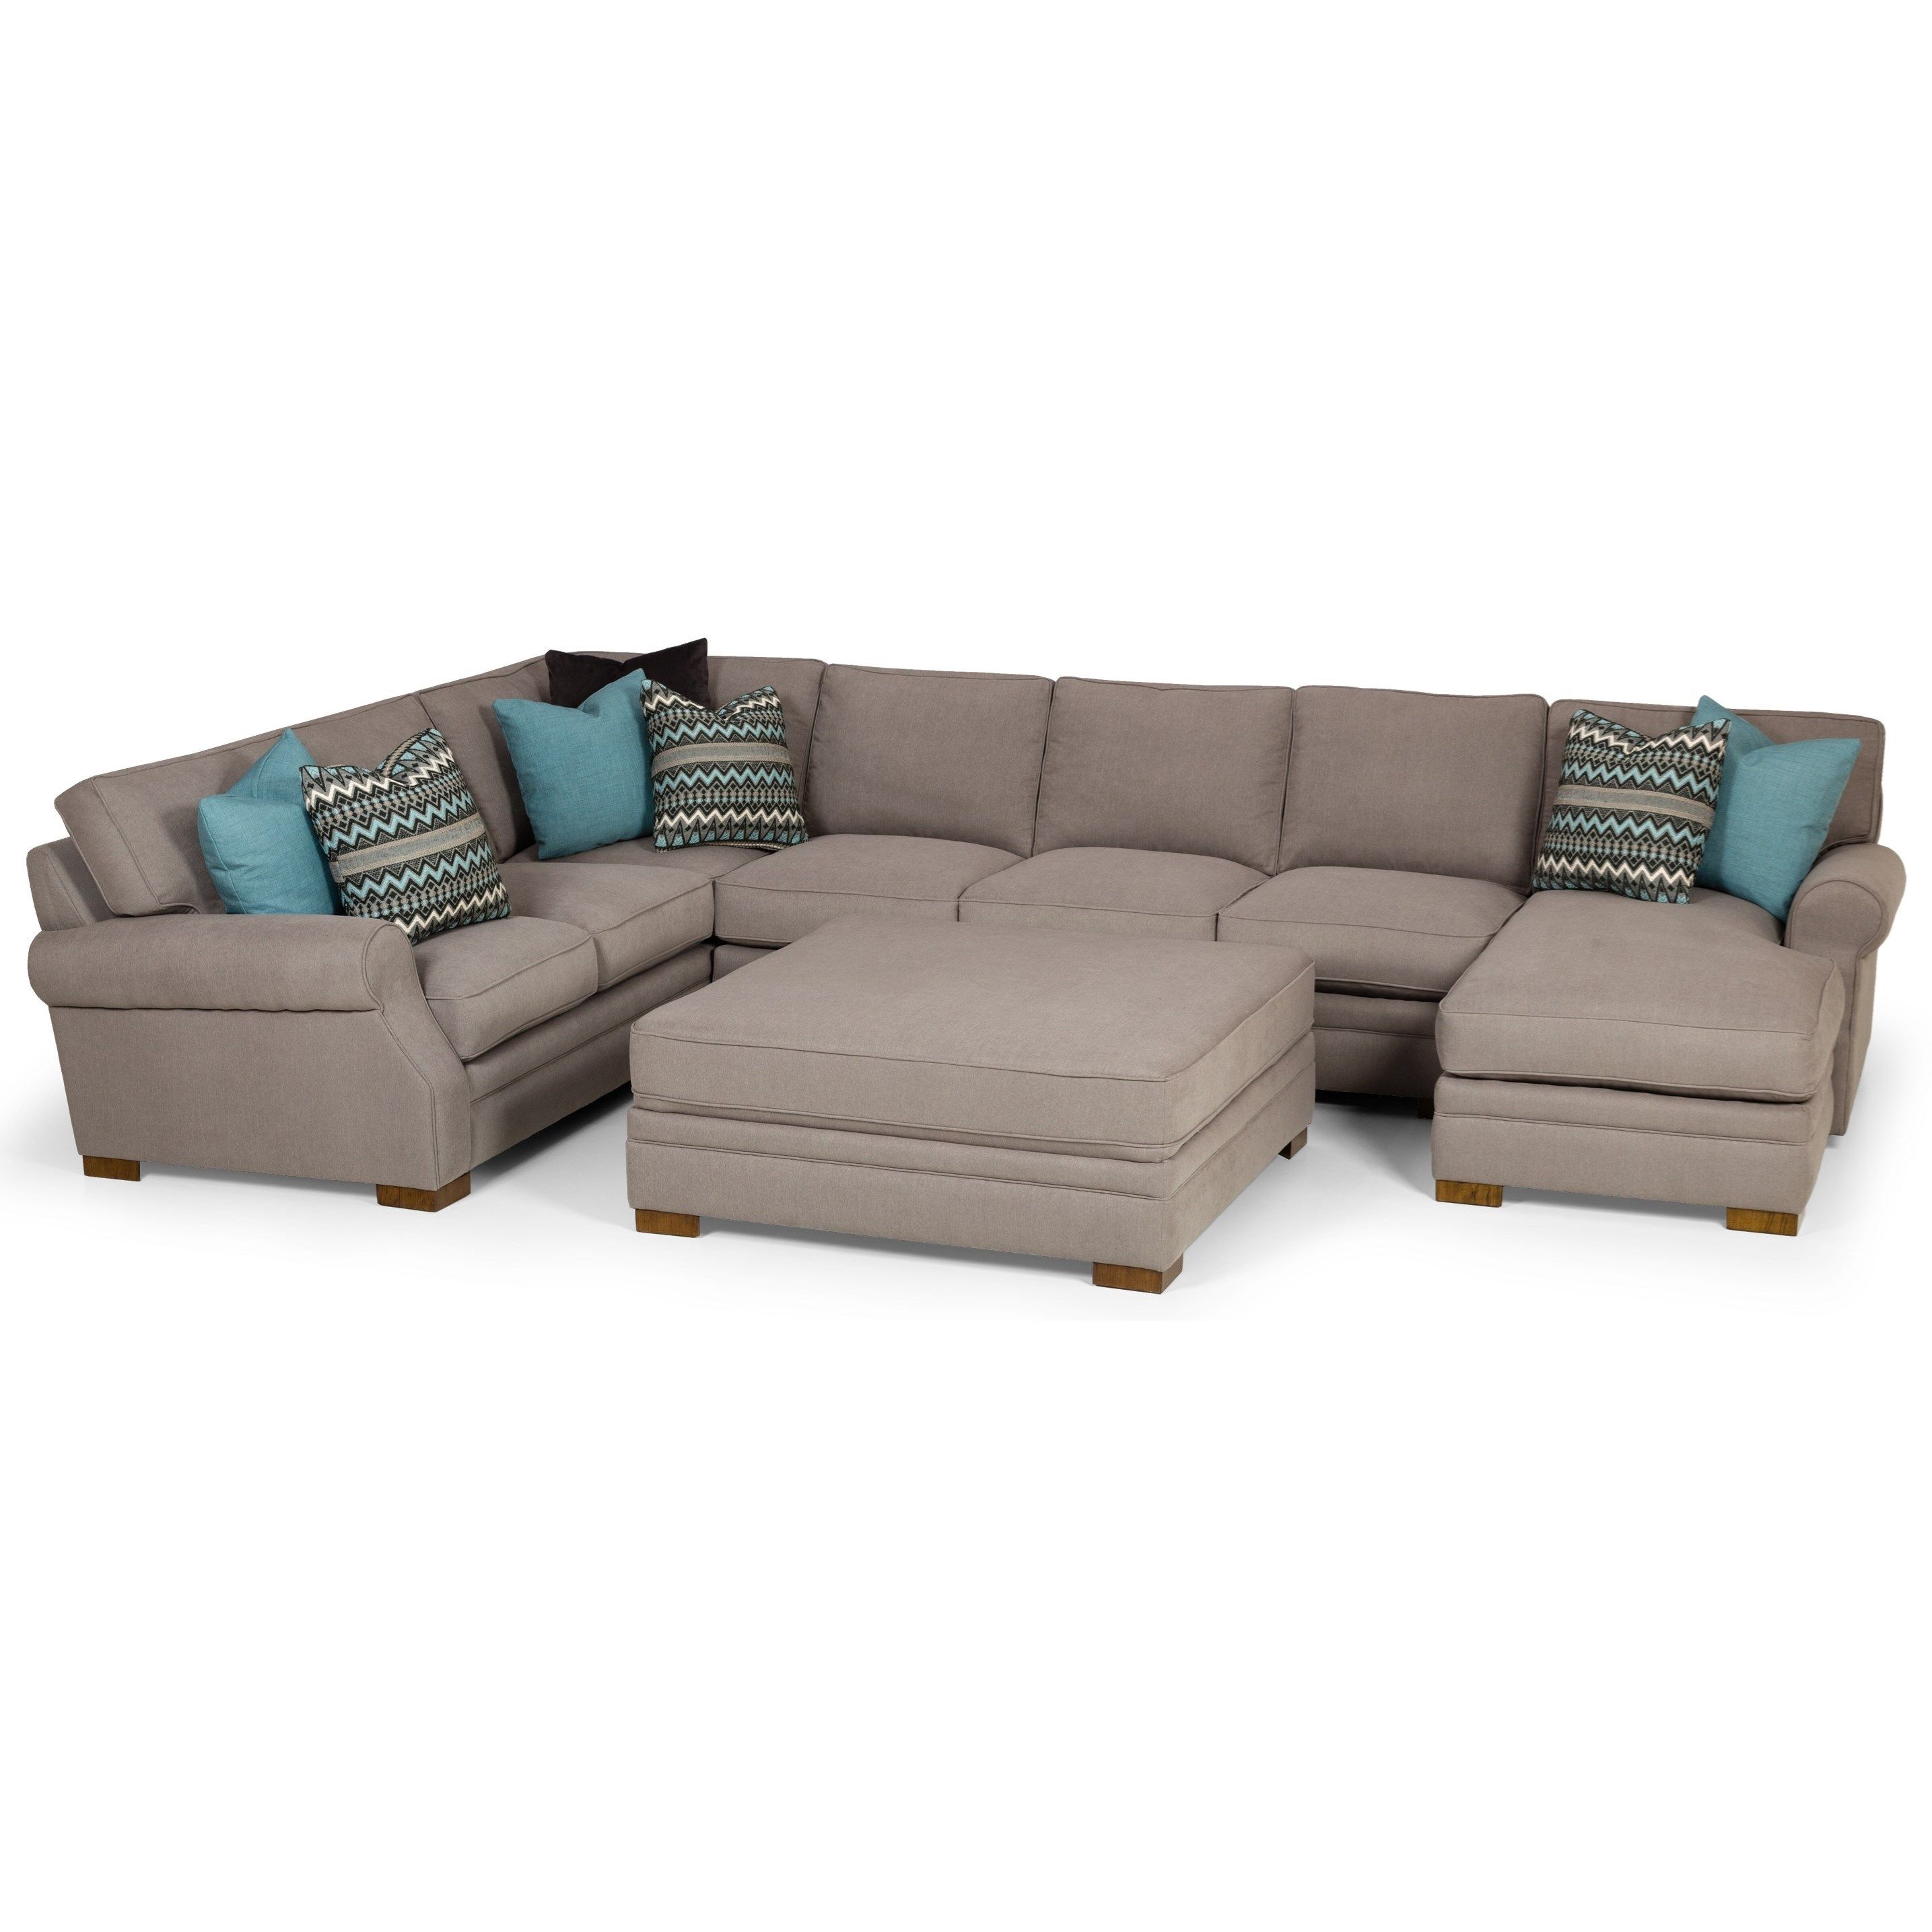 Sunset Home 525 6 Seat U Shape Sectional Sofa With Raf Chaise | Sadler's  Home Furnishings | Sectional Sofas Regarding 6 Seater Sectional Couches (View 6 of 20)